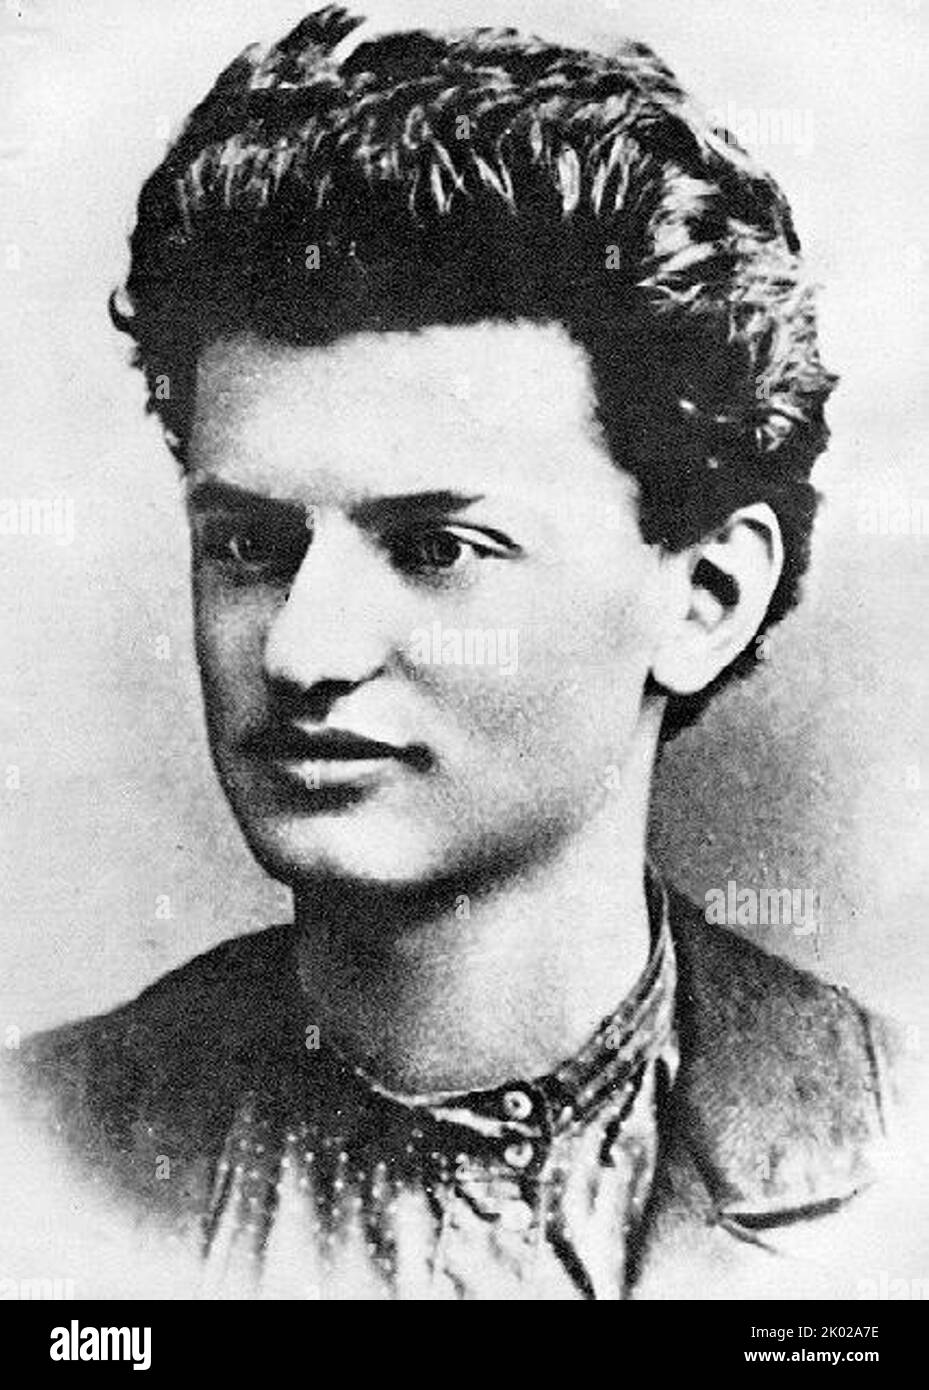 Leon Trotsky (1879 - 1940), Ukrainian revolutionary, political theorist and politician. Ideologically a communist, he developed a variant of Marxism known as Trotskyism Stock Photo